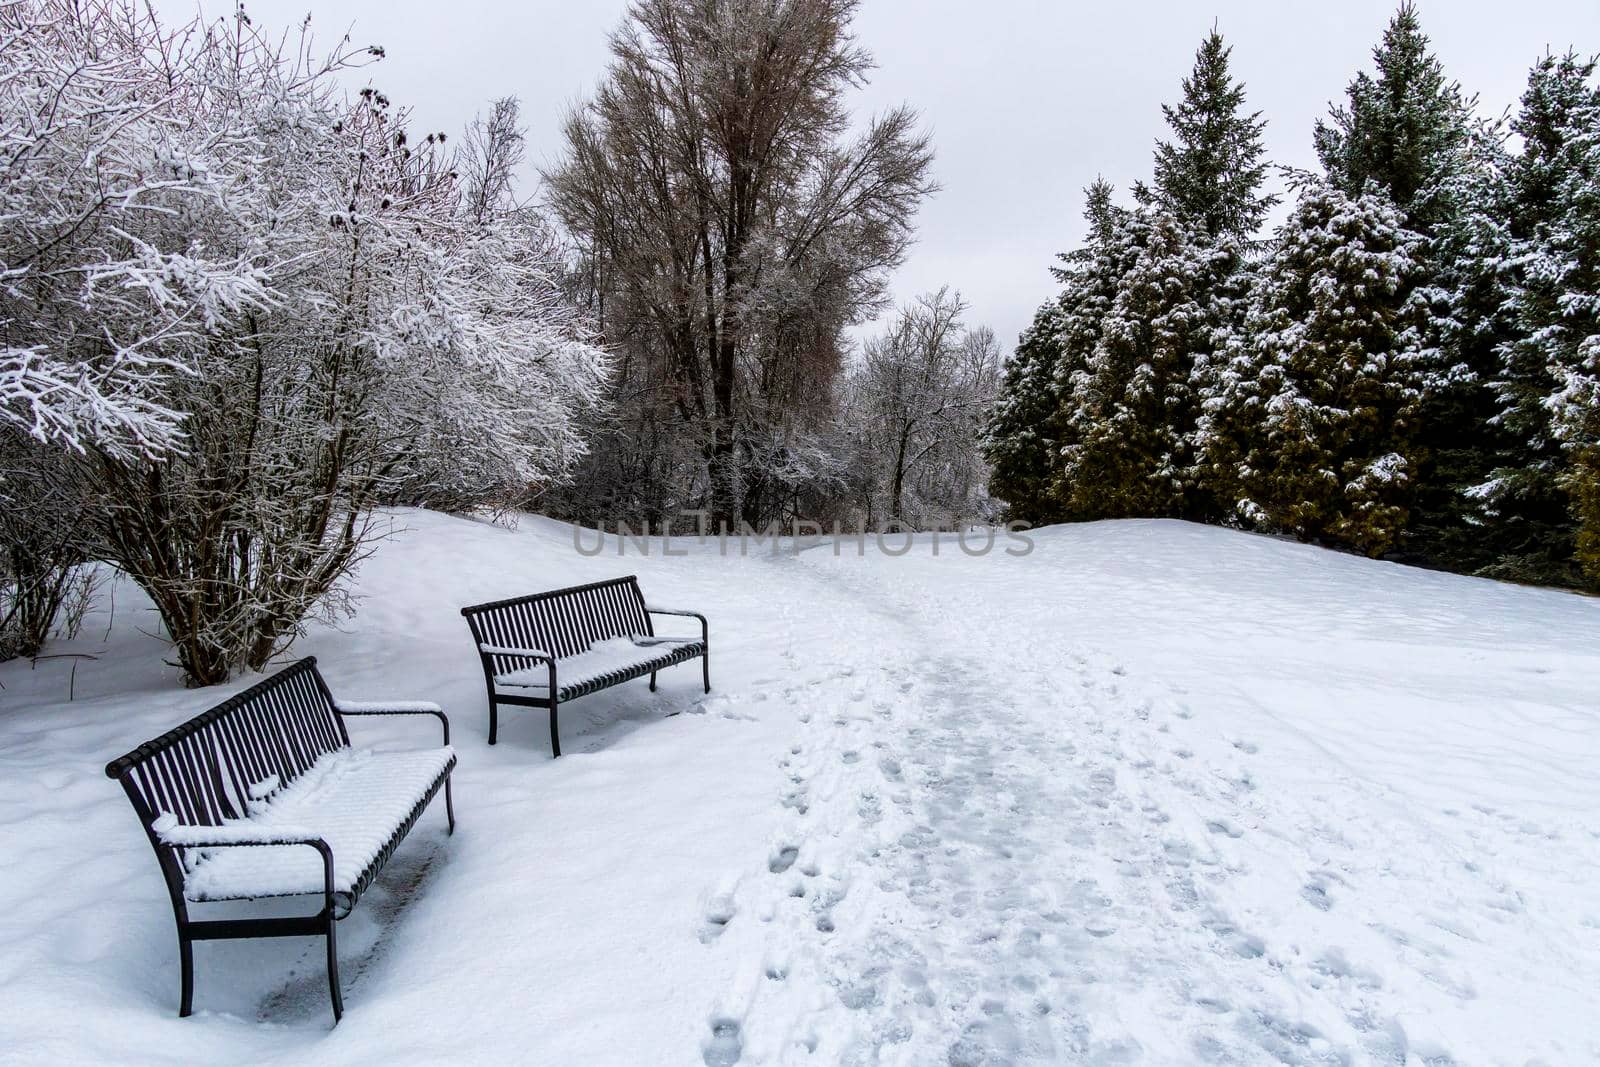 Two metal benches, covered with snow, stand alone near the path in the park